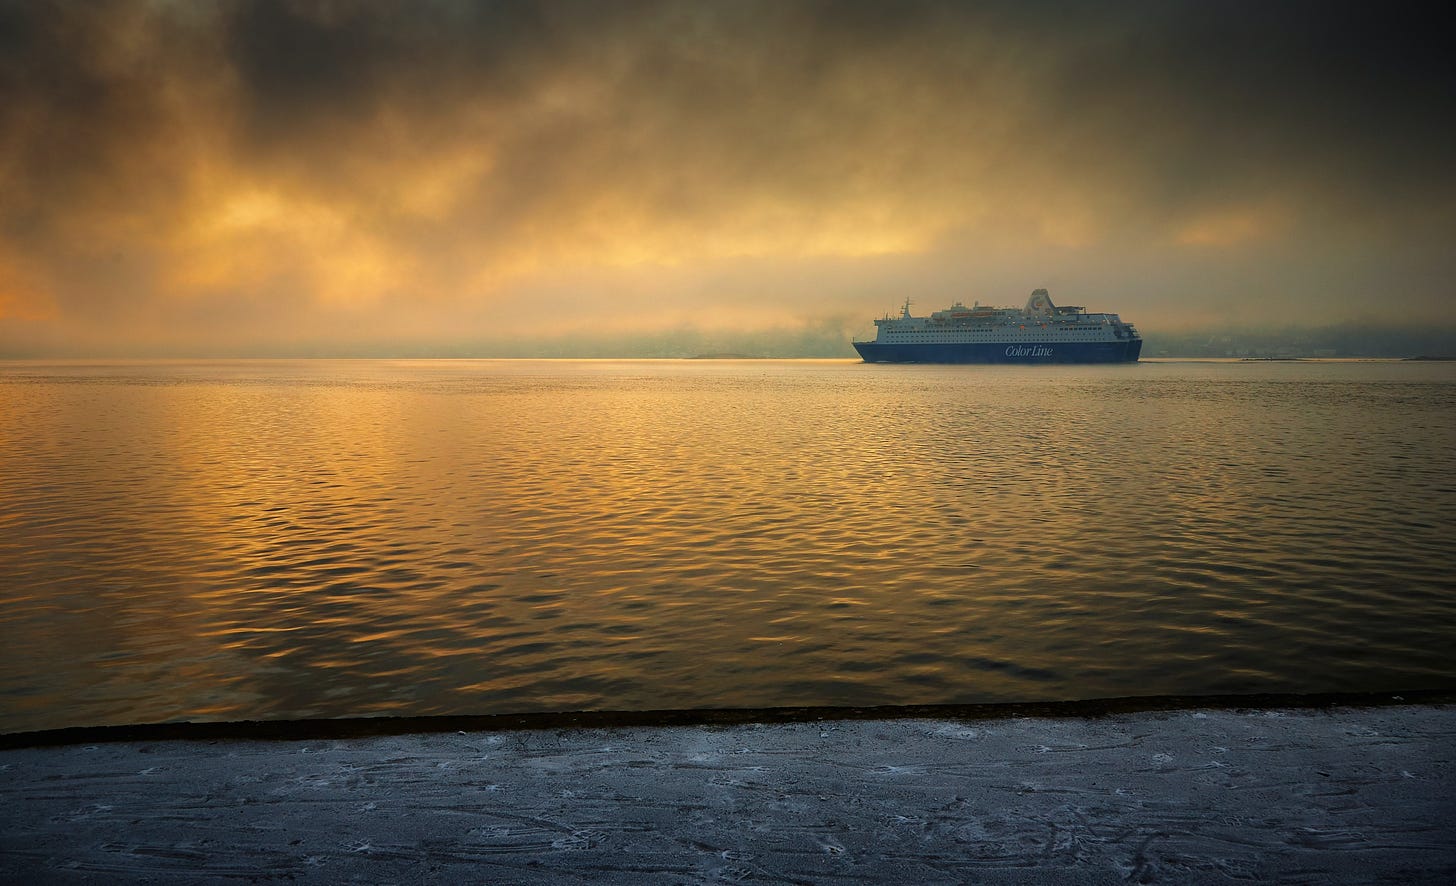 A blue and white ocean liner sailing the open waters in the background. The sky is a golden color and is reflected in the water.